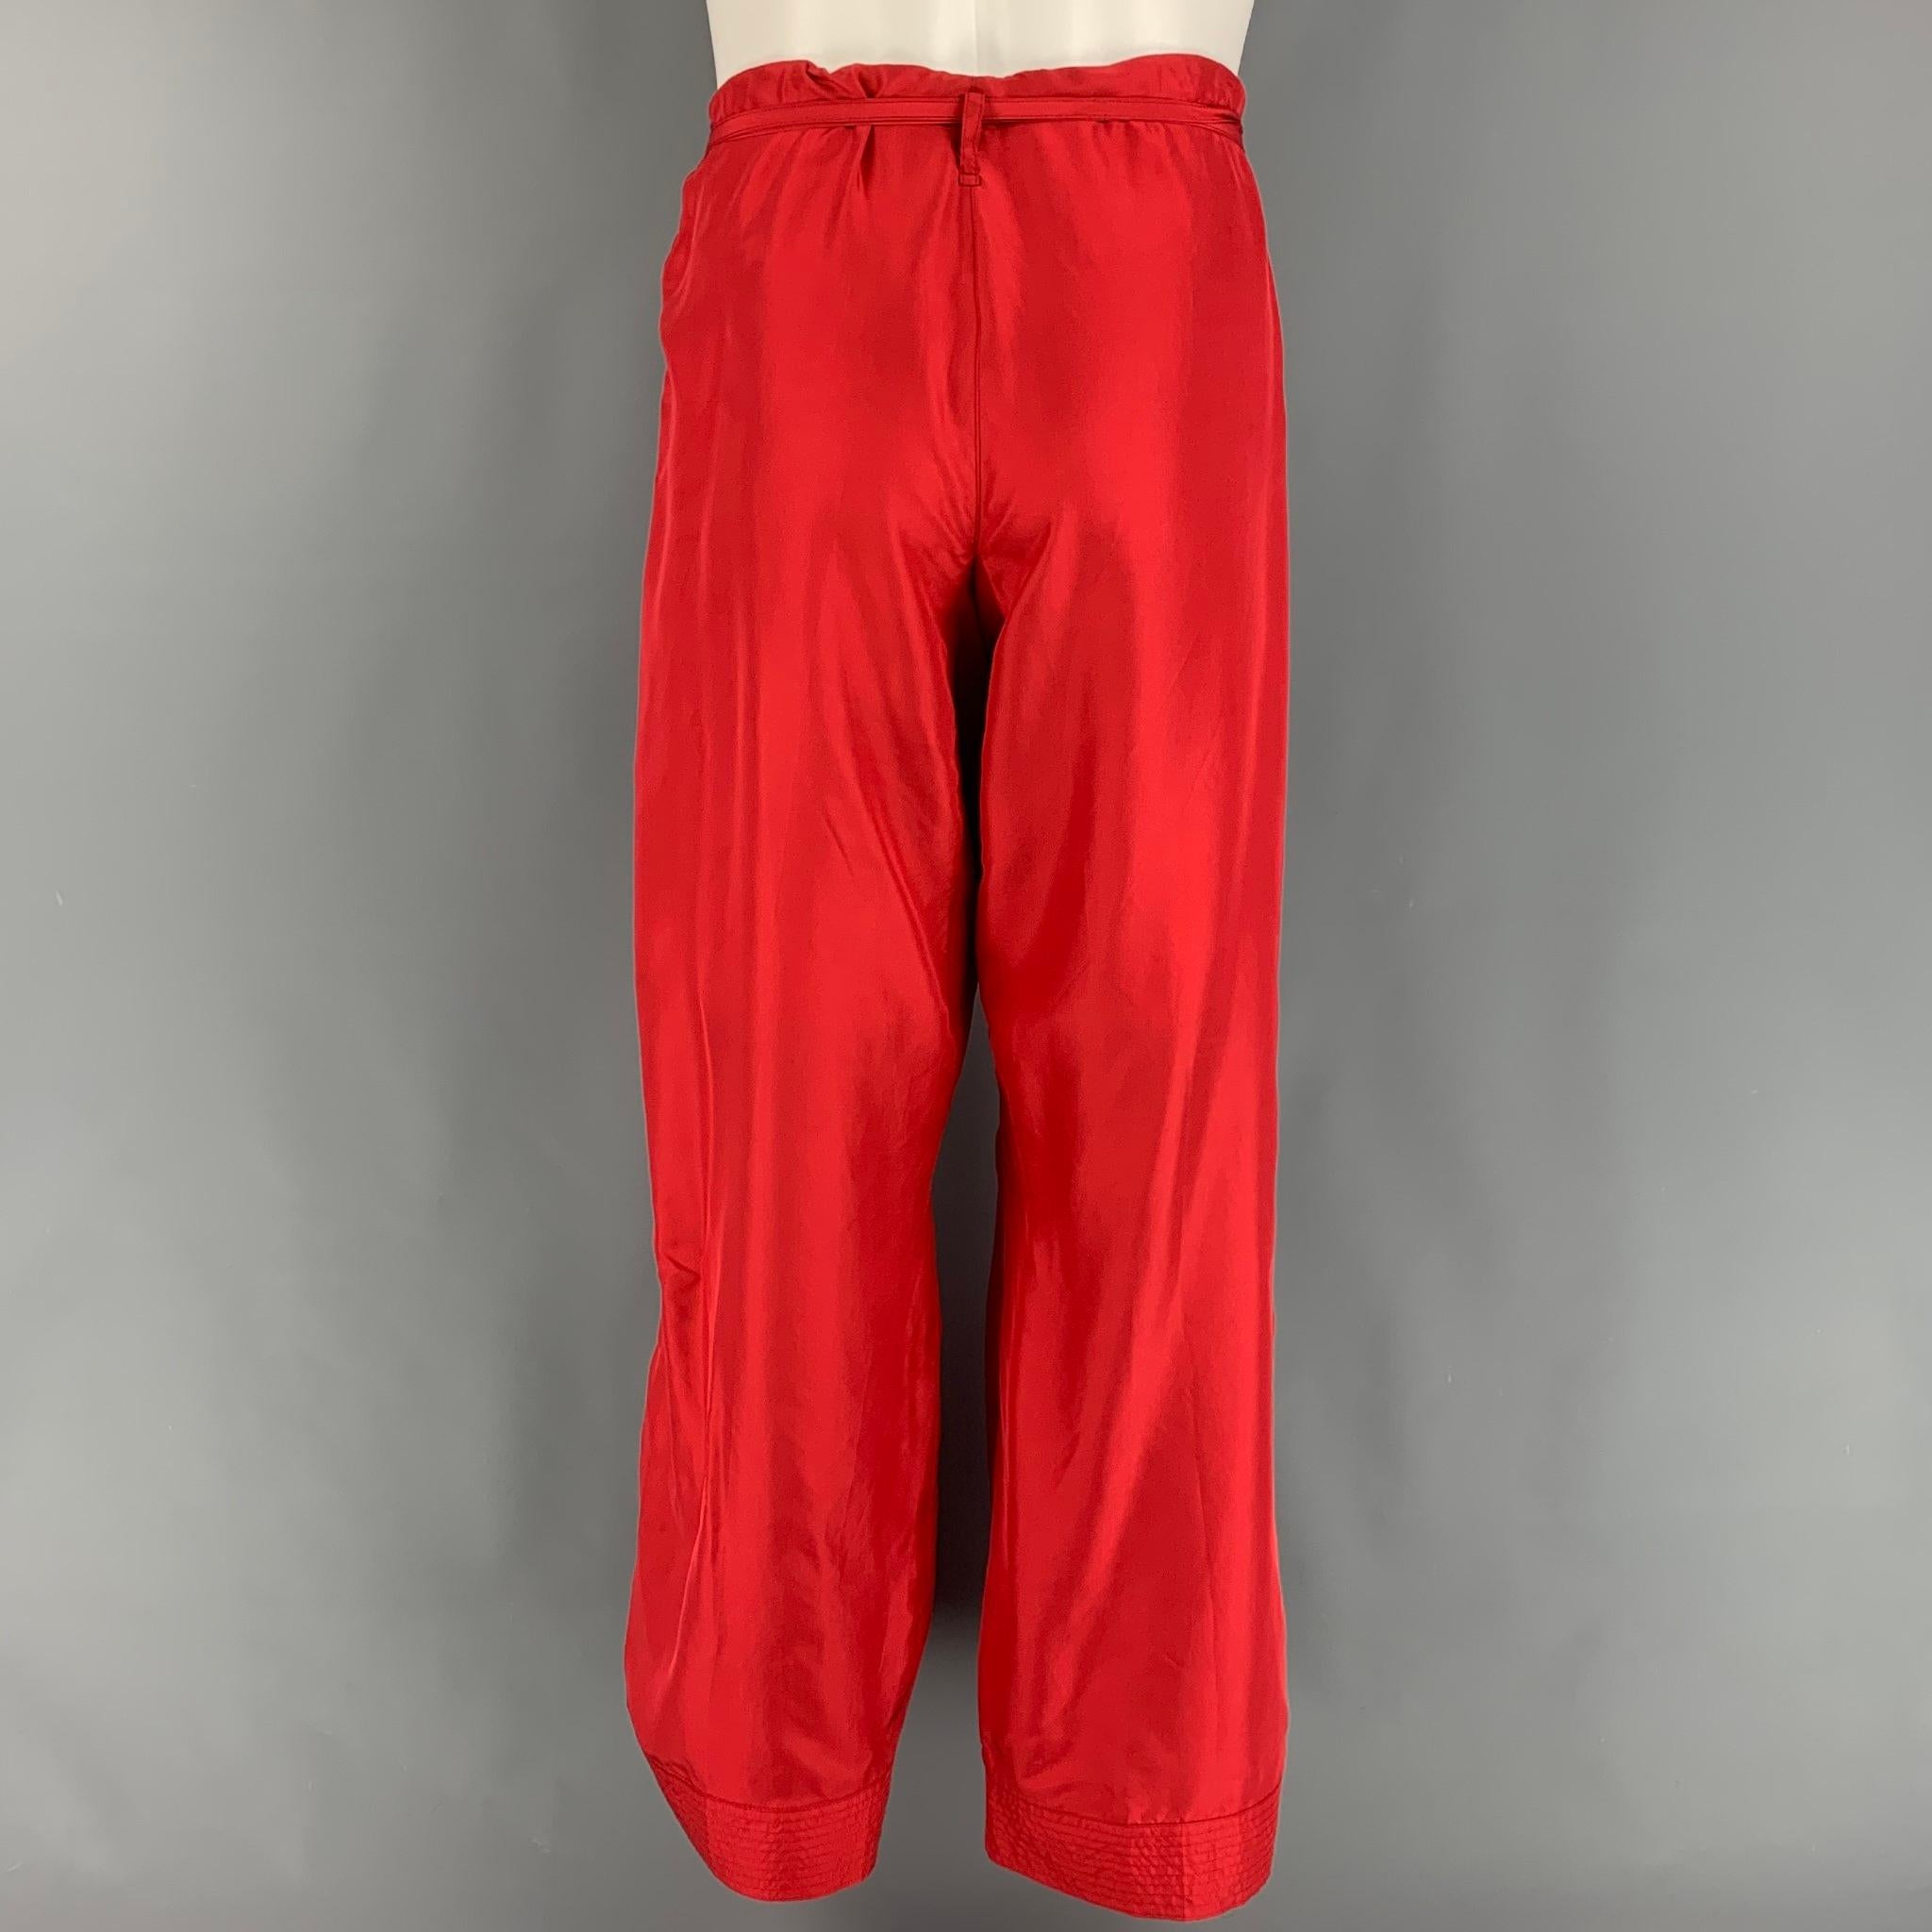 GUCCI by TOM FORD Spring Summer 2001 collection karate style plants comes in a red silk featuring a wide leg style, drawstring waistband, quilted hem, and a button fly closure. Made in Italy. 

Very Good Pre-Owned Condition.
Marked: